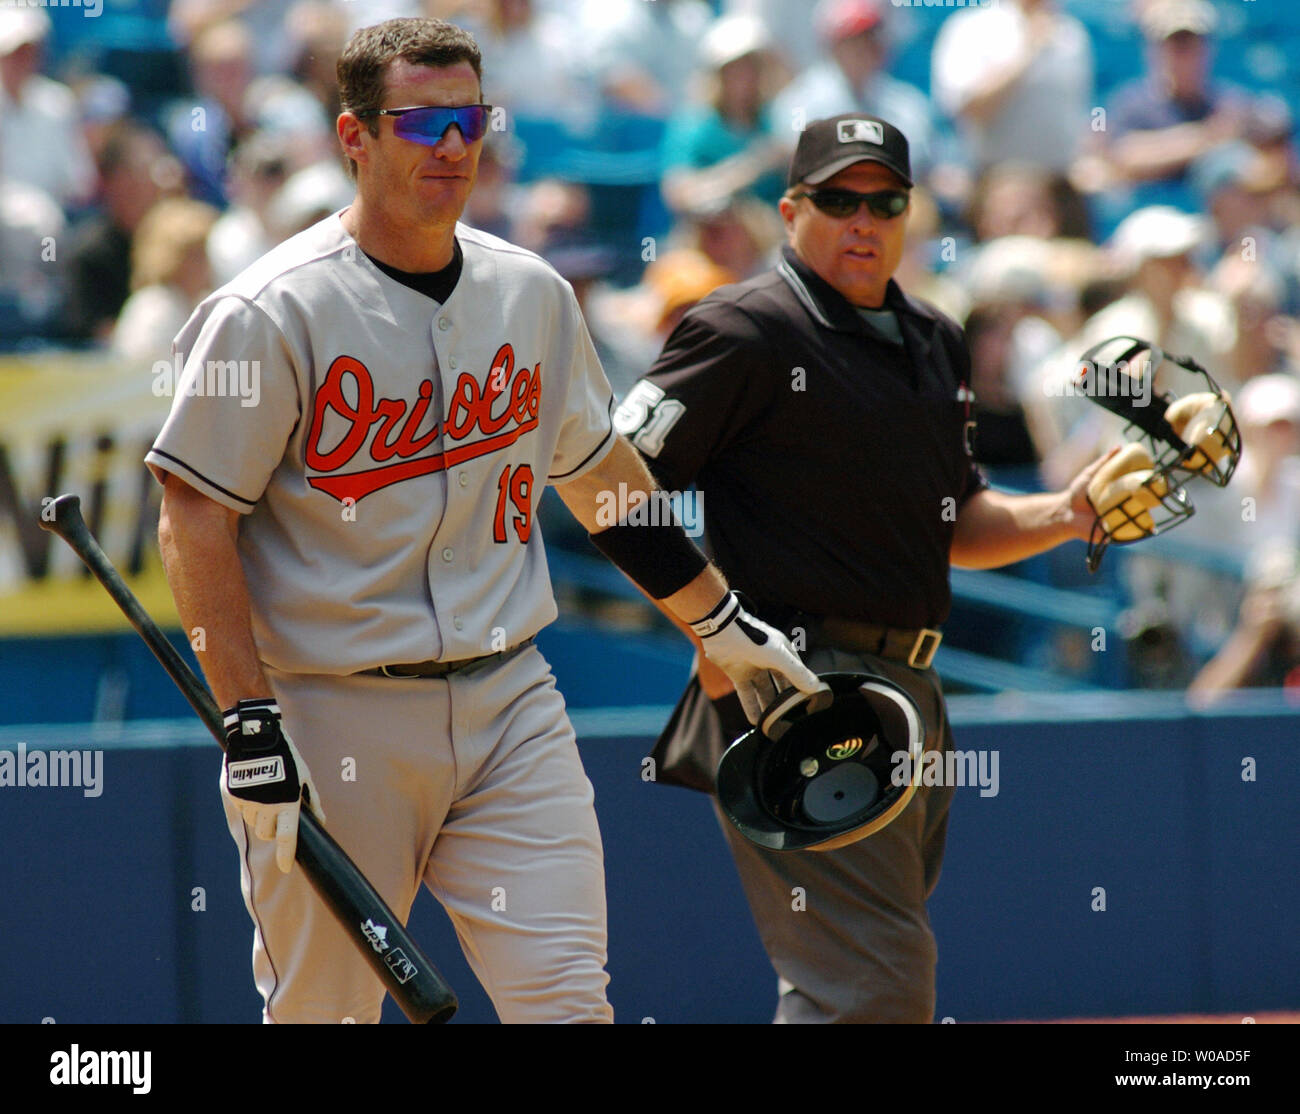 362 Florida Marlins Jeff Conine Photos & High Res Pictures - Getty Images